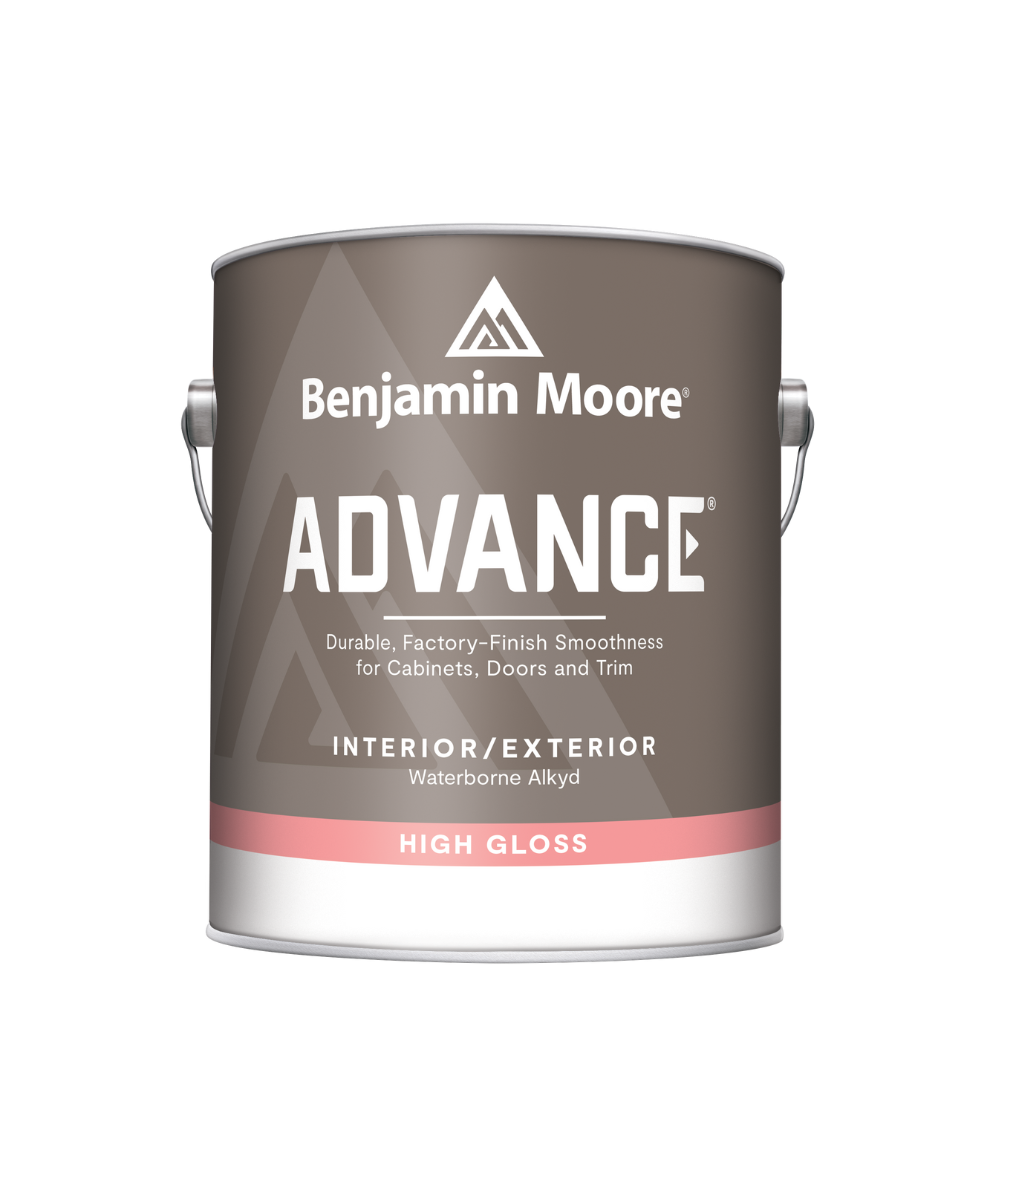 Benjamin Moore Advance High Gloss Paint available at JC Licht.